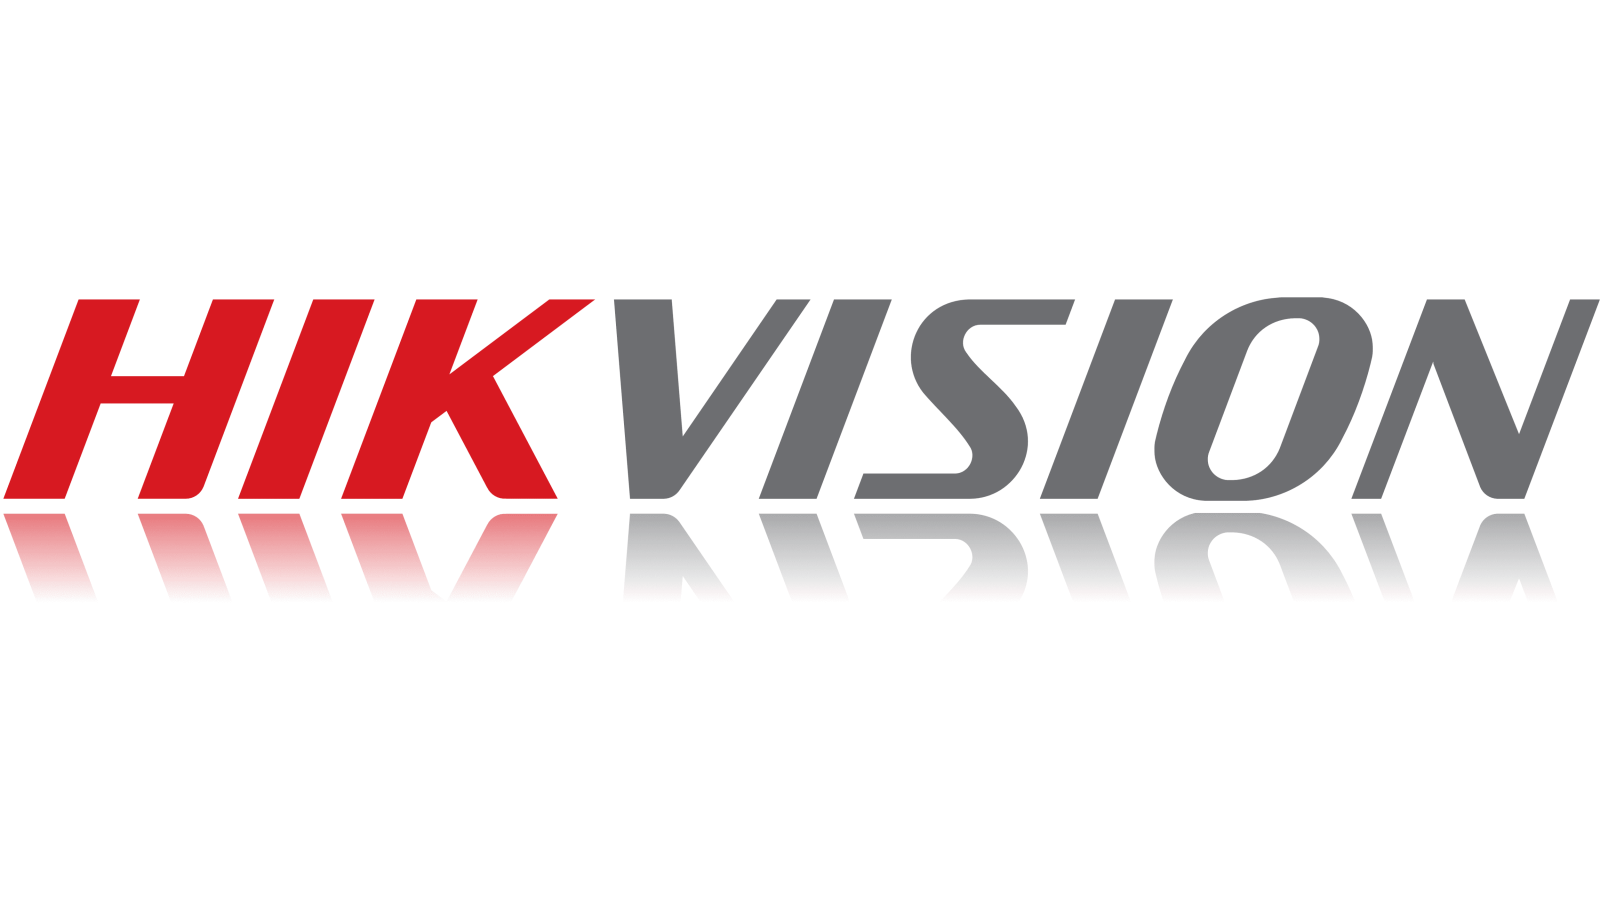 producent hikvision